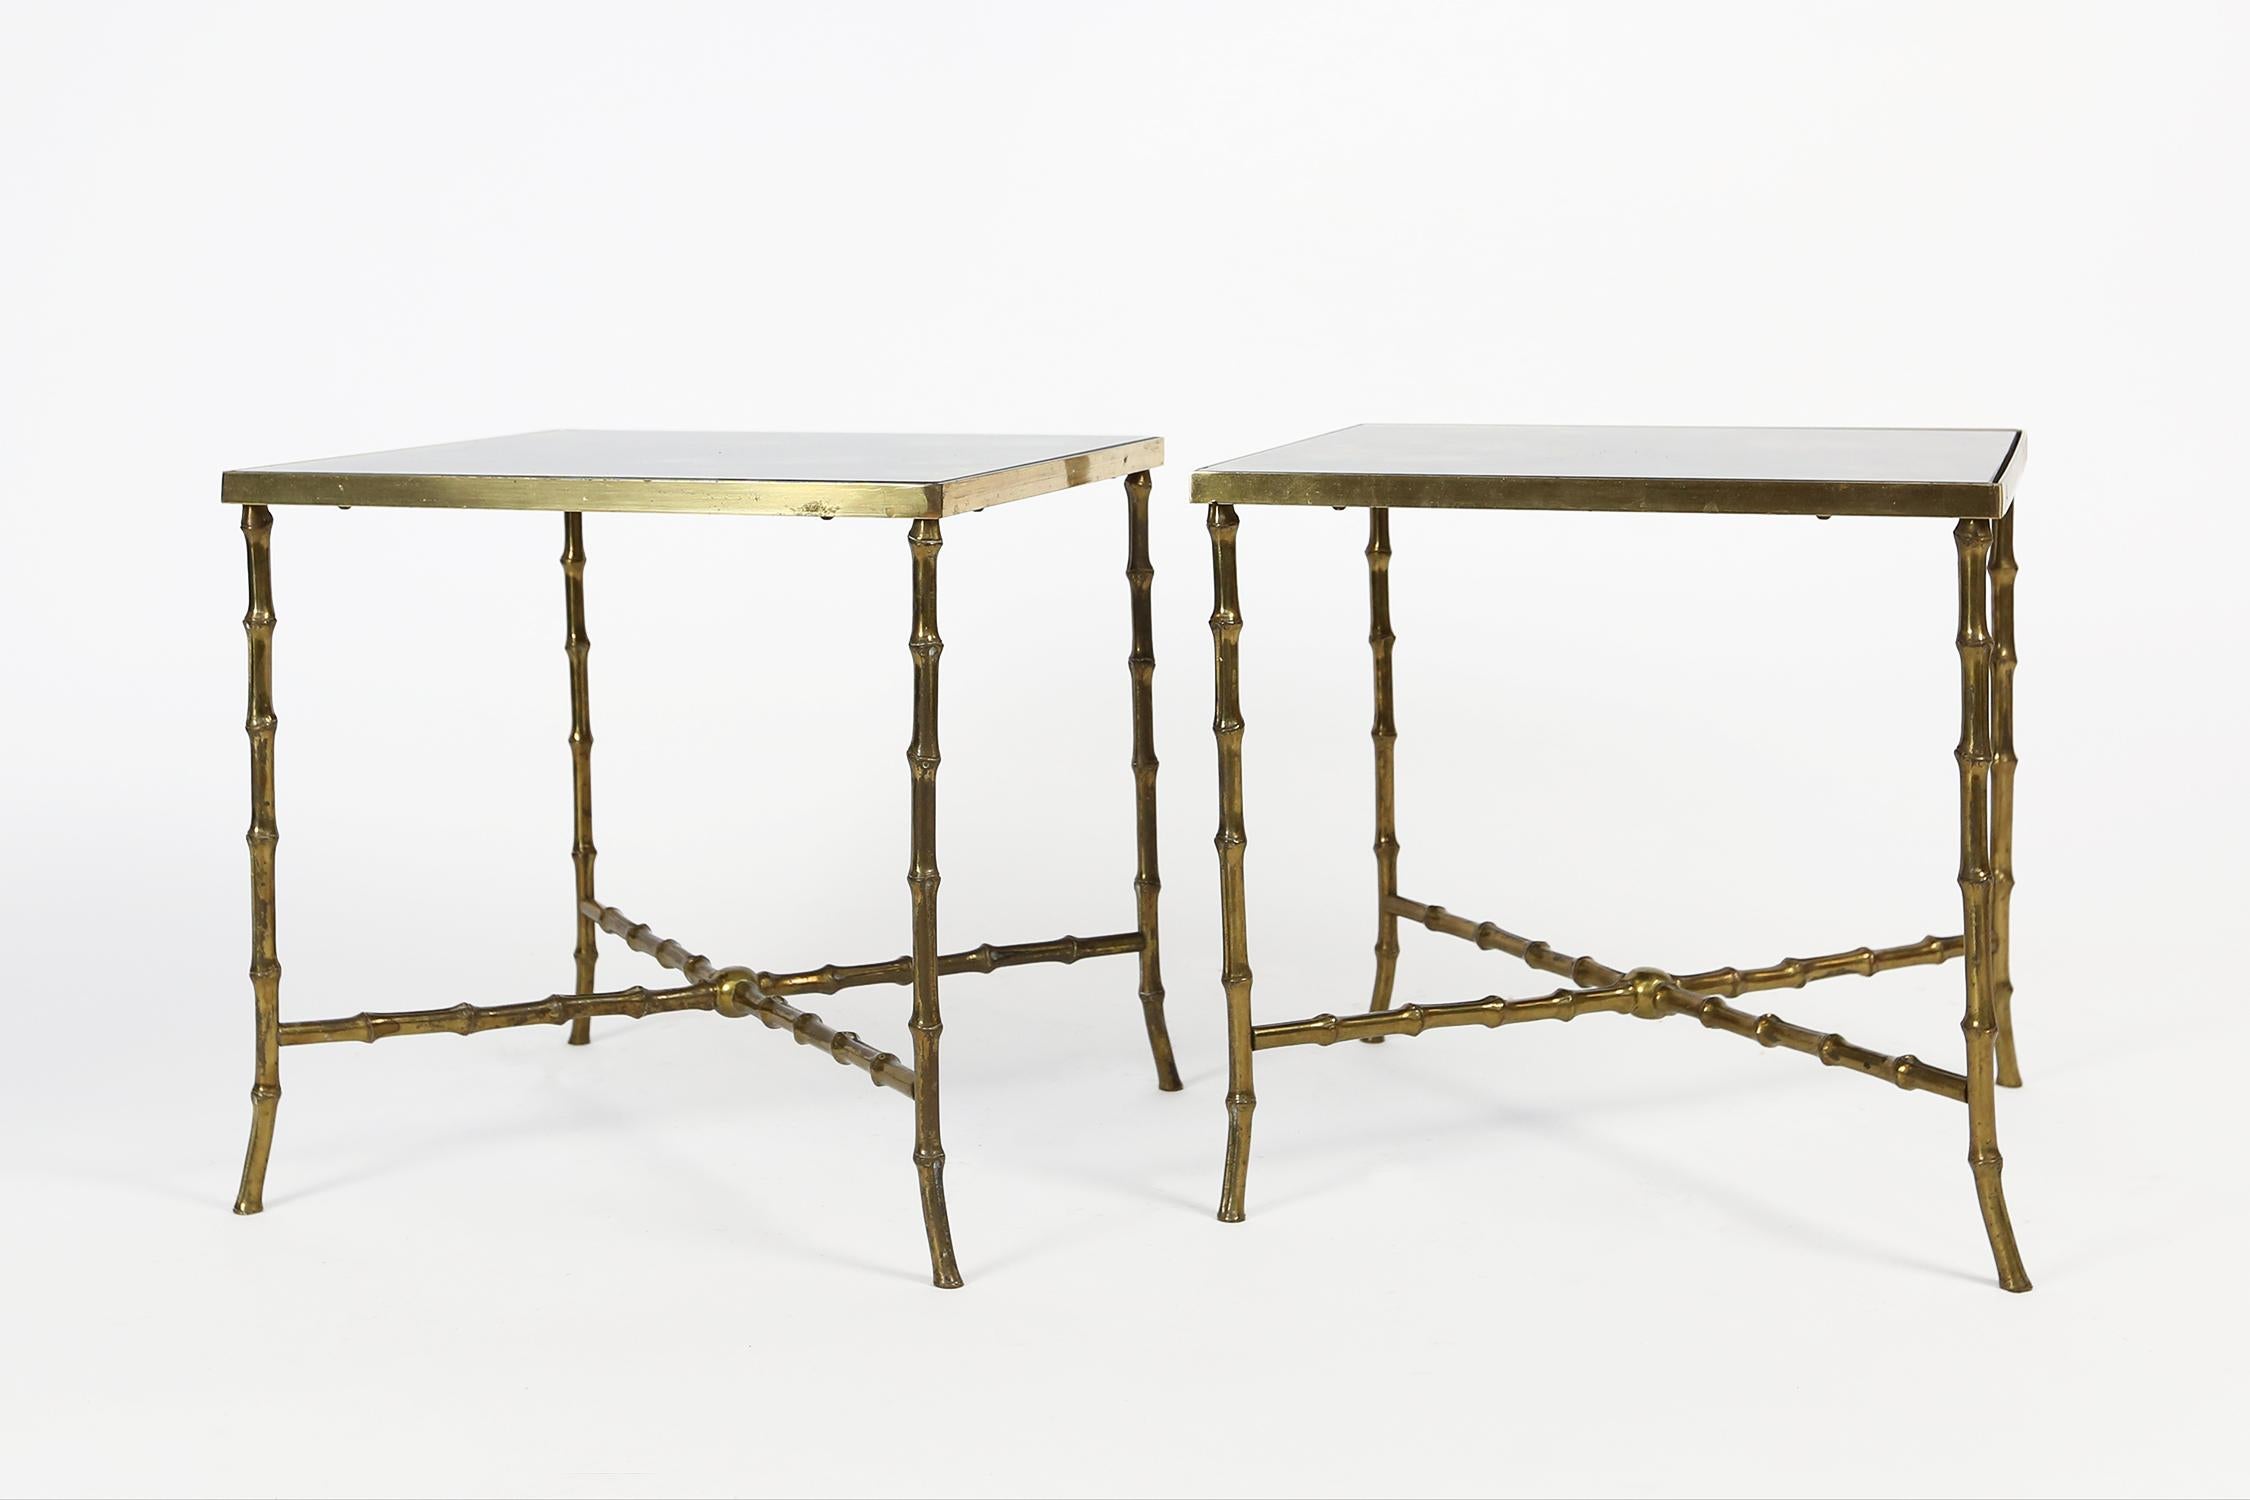 A rare pair of sidetables in faux bamboo brass from Maison Baguès.
These tables can be dated circa 1955 and are finely cast in brass and are adorned with original patinated glass tops.
The look is Classic, timeless and always sophisticated.
In